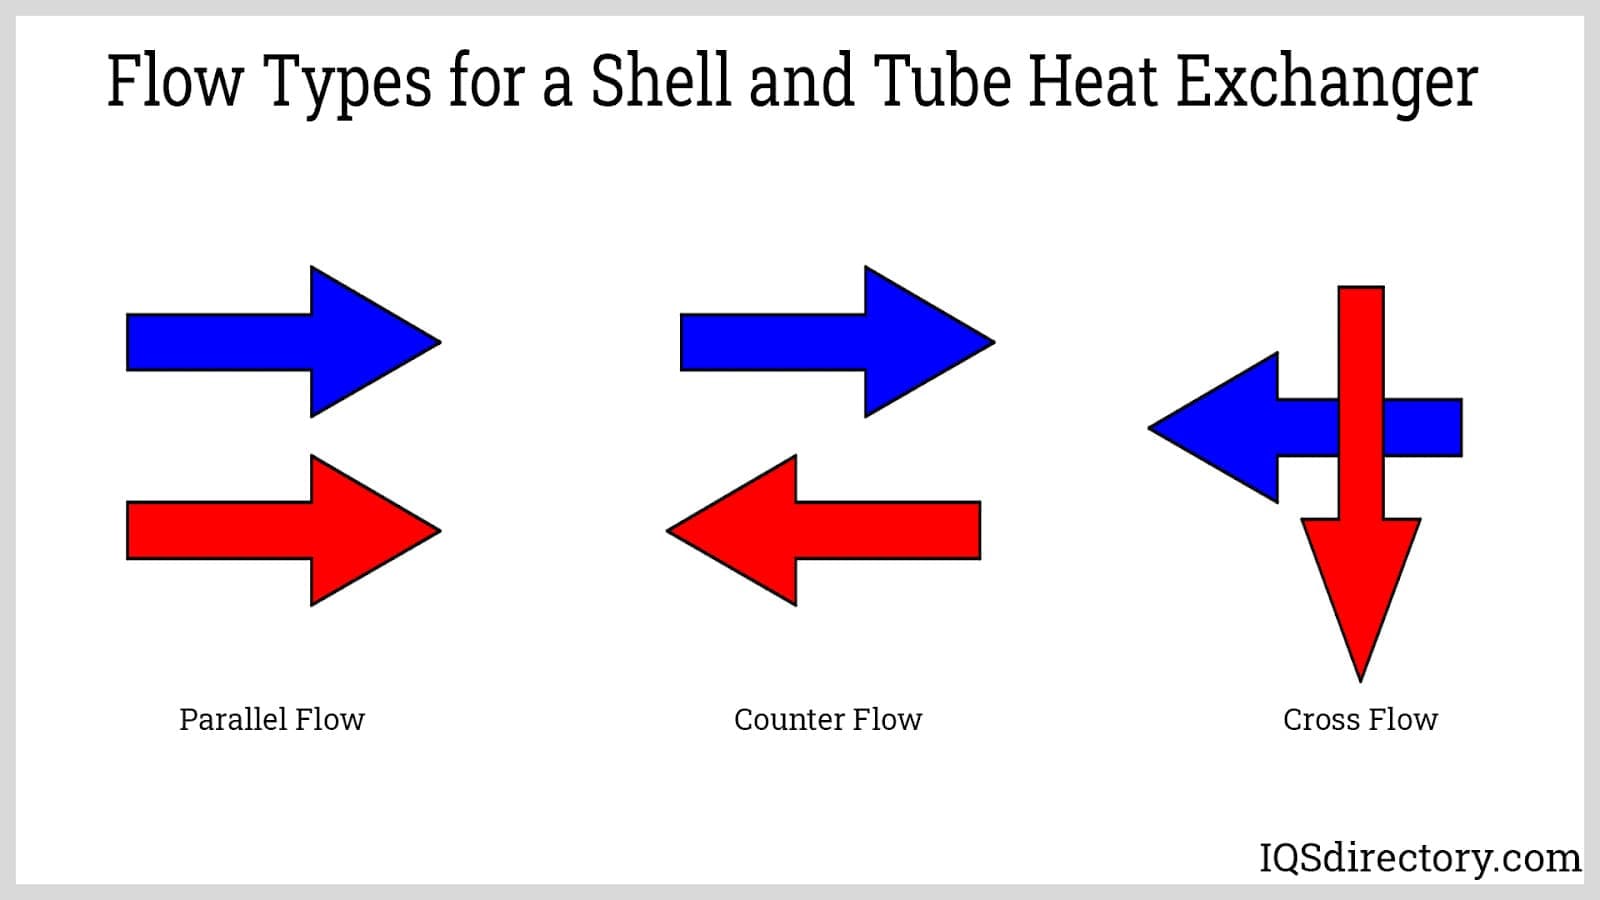 Flow Types for a Shell and Tube Heat Exchanger